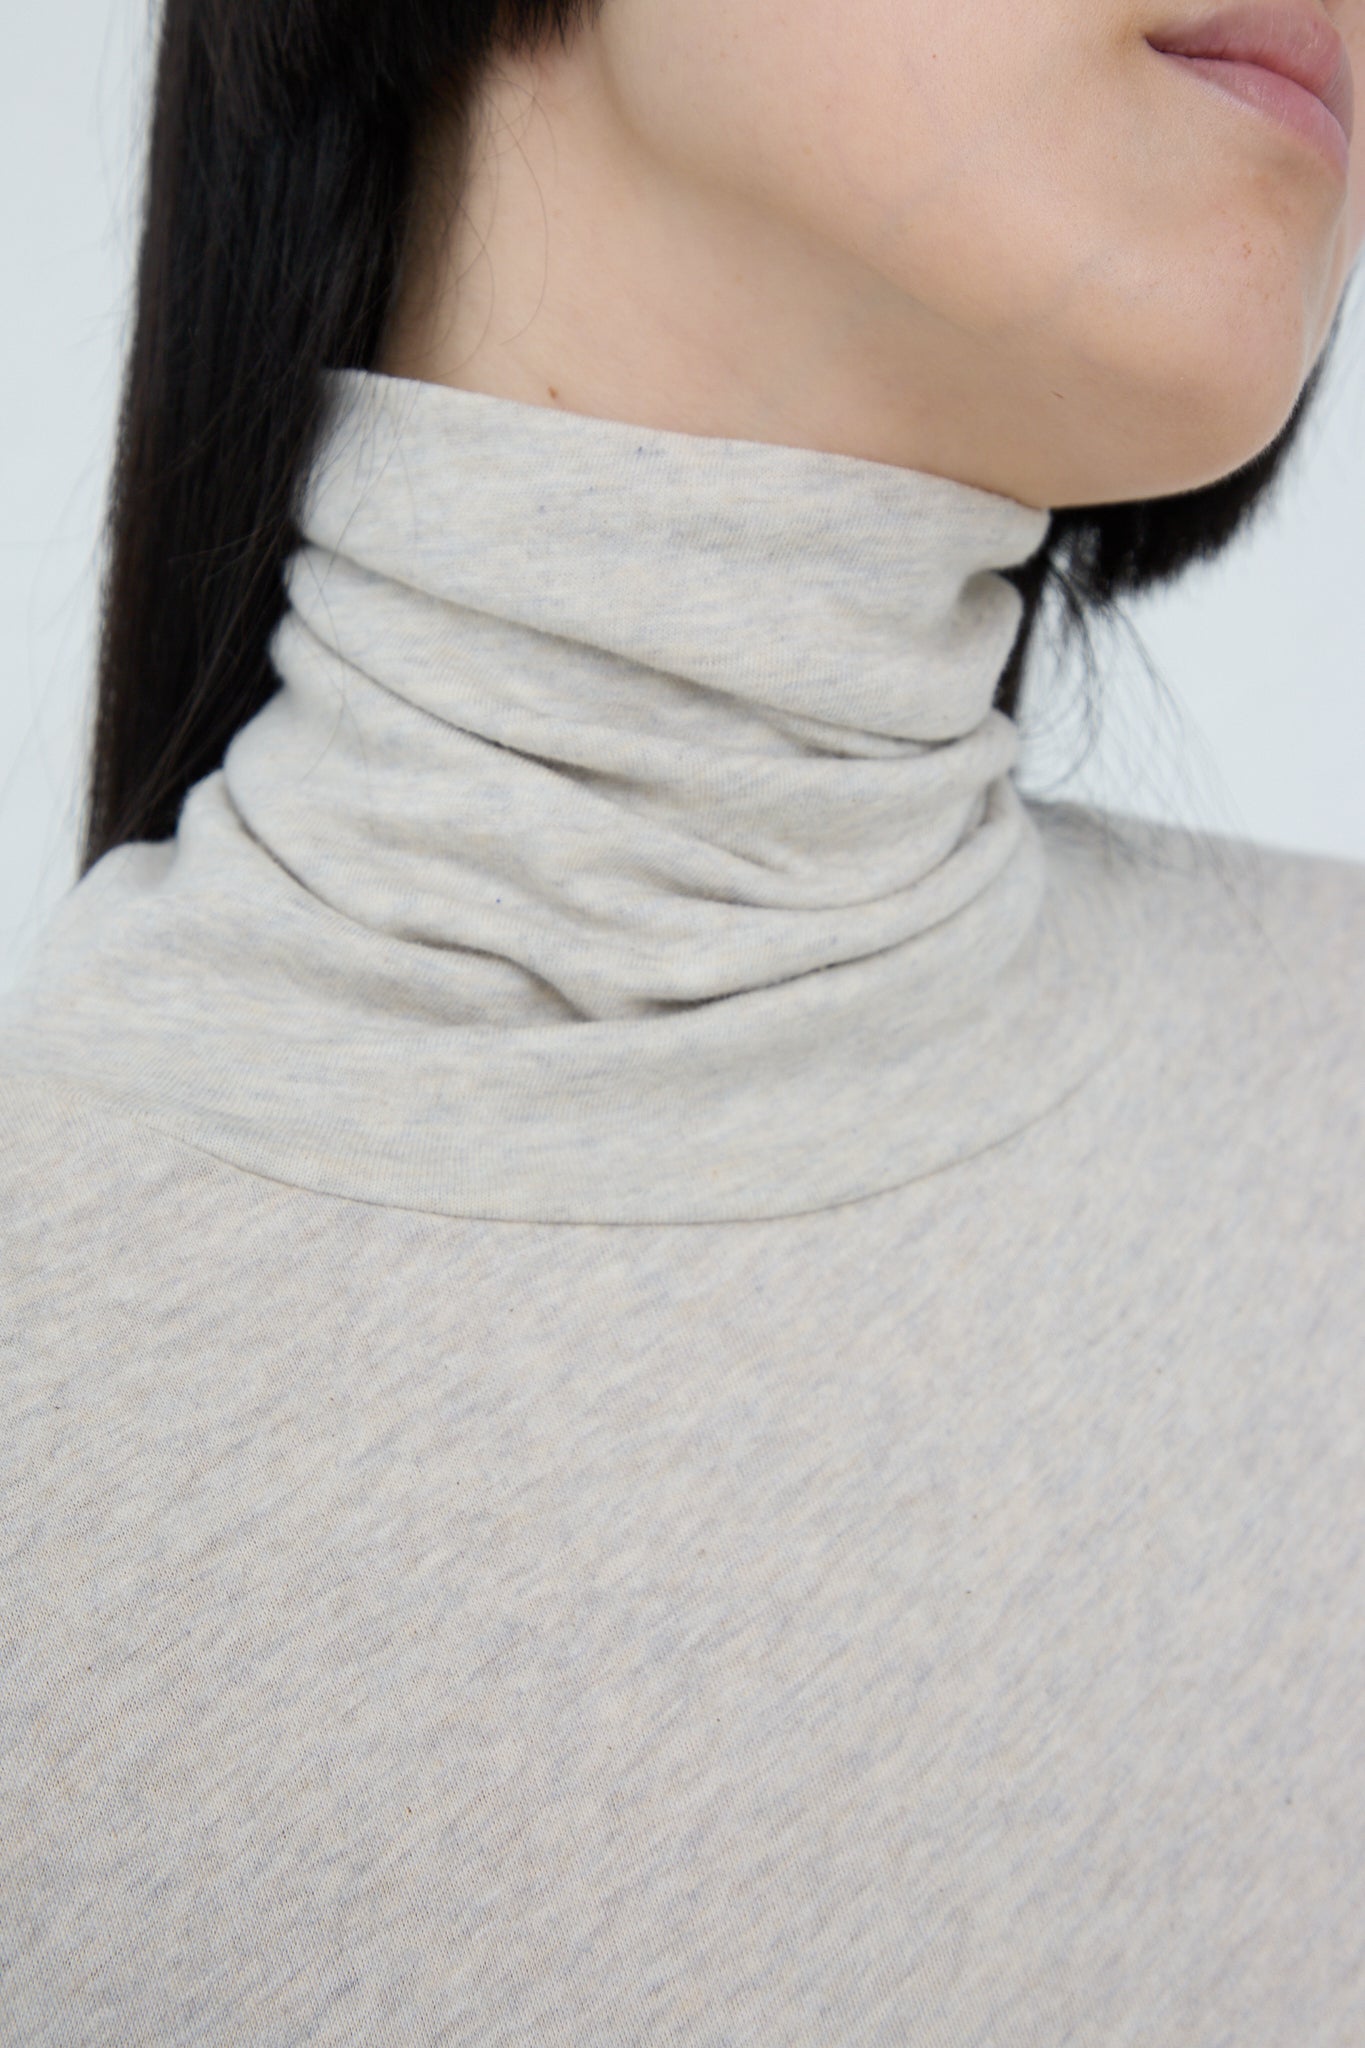 A woman wearing an Ichi relaxed fit, long sleeve Cotton Knit Turtleneck sweater in Oatmeal.